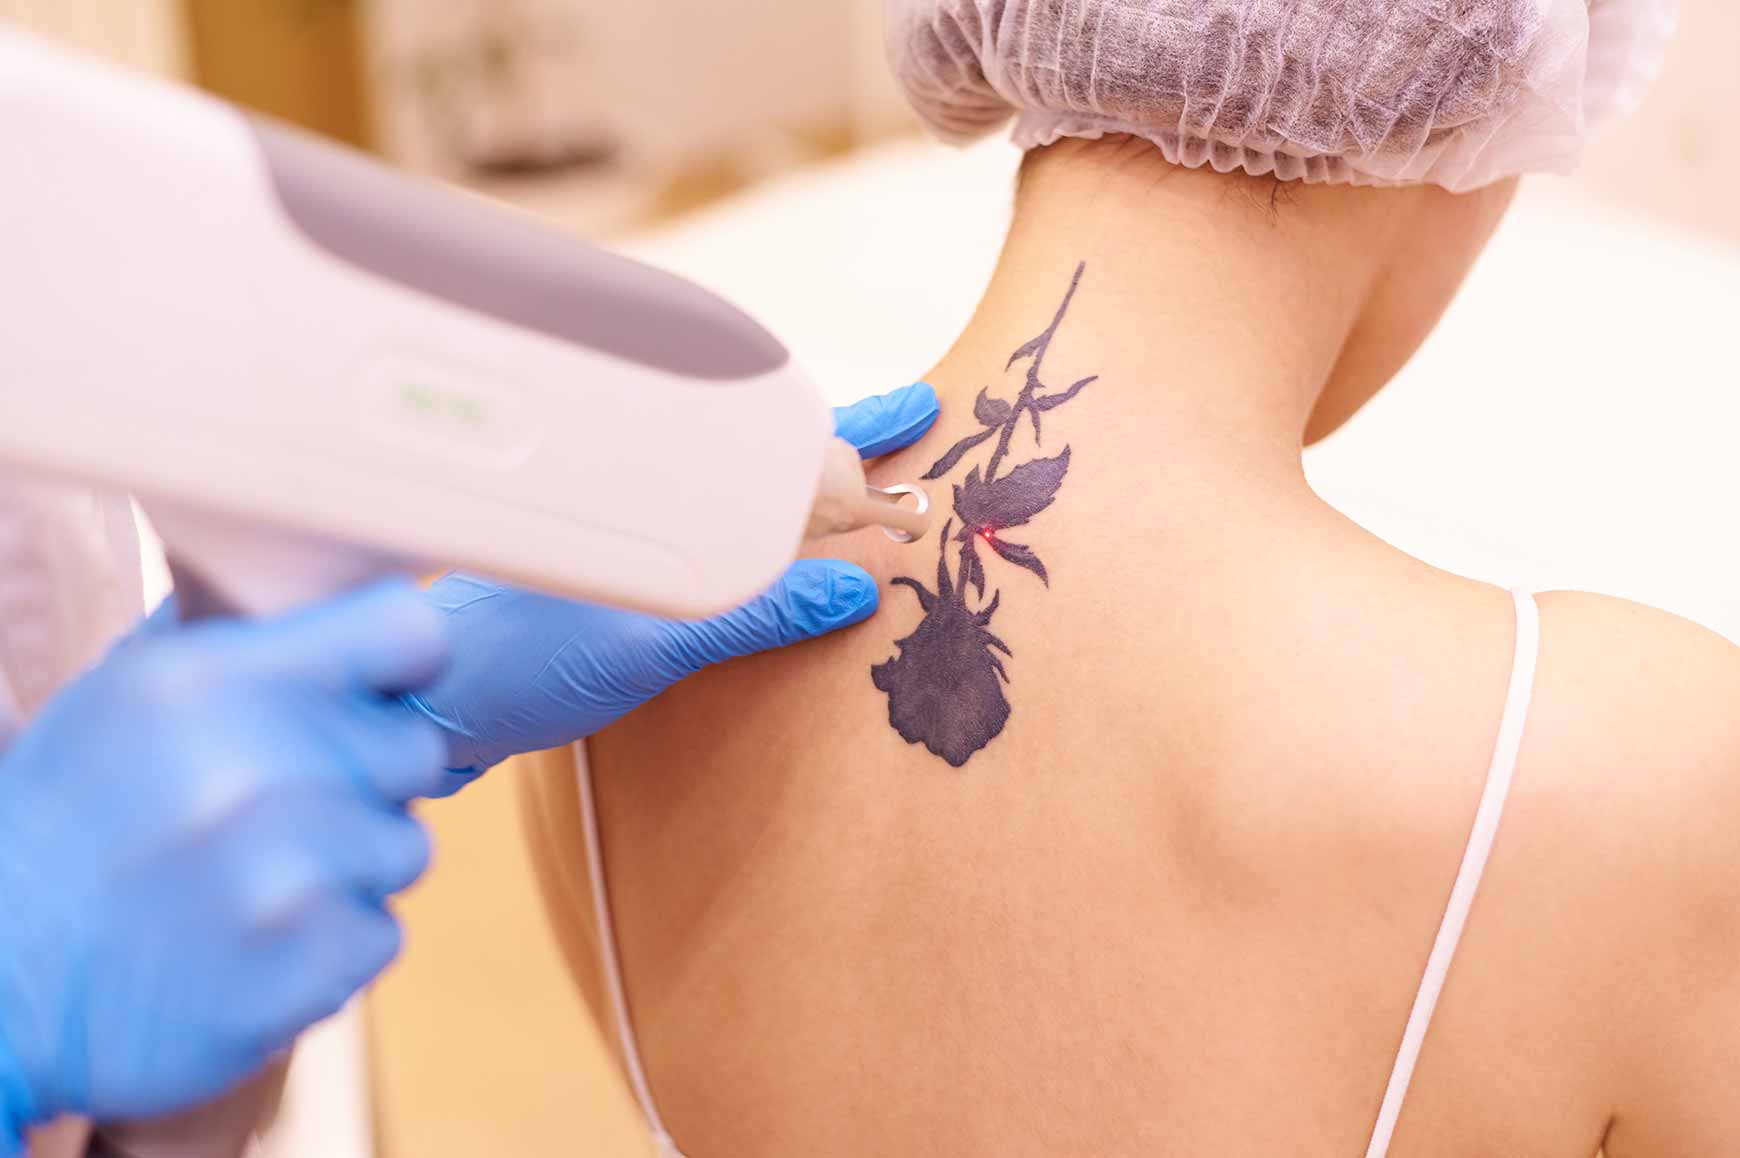 Get your tattoo removed safely with our laser treatment